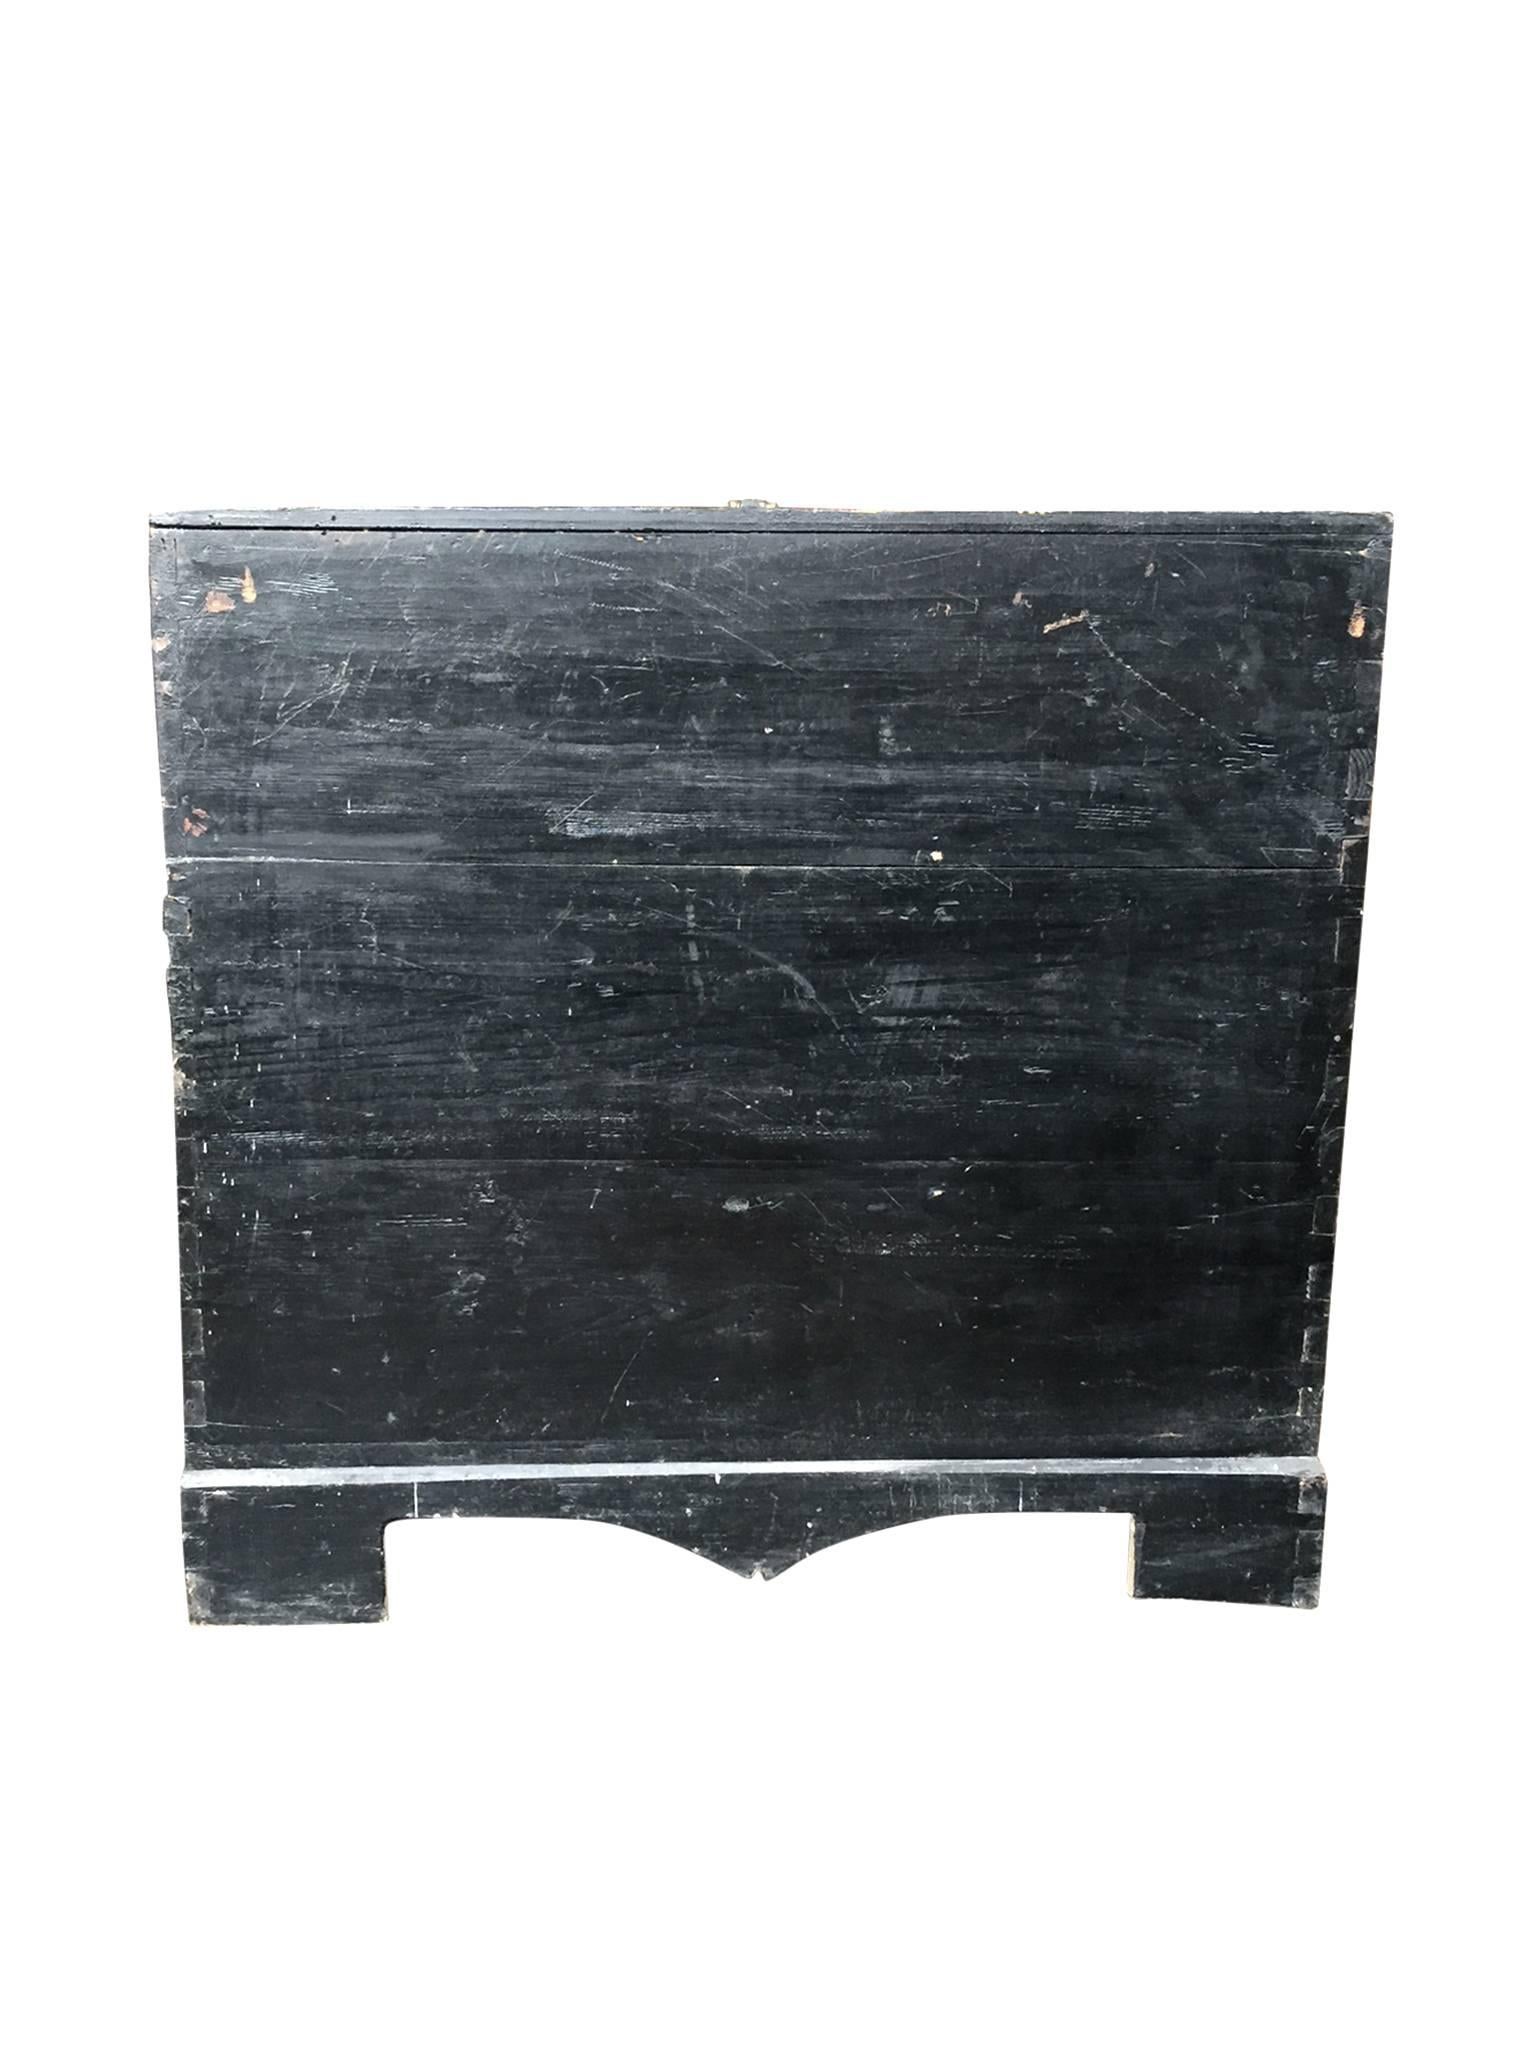 Etched Antique Korean Yew Wood Chest or Bandaji